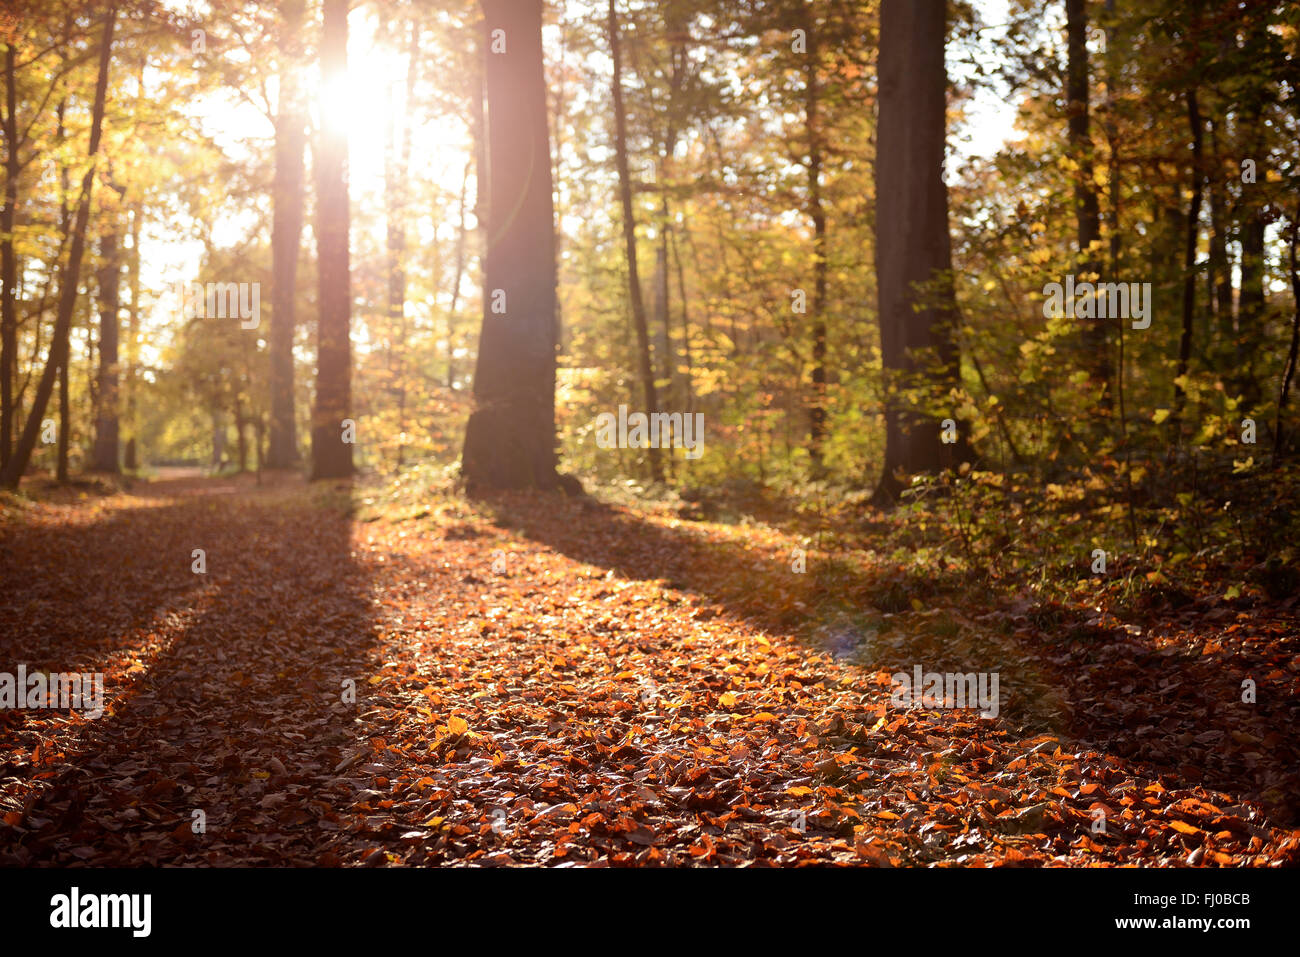 Germany, Duesseldorf, Benrath forest, Trees and sunshine in autumn Stock Photo